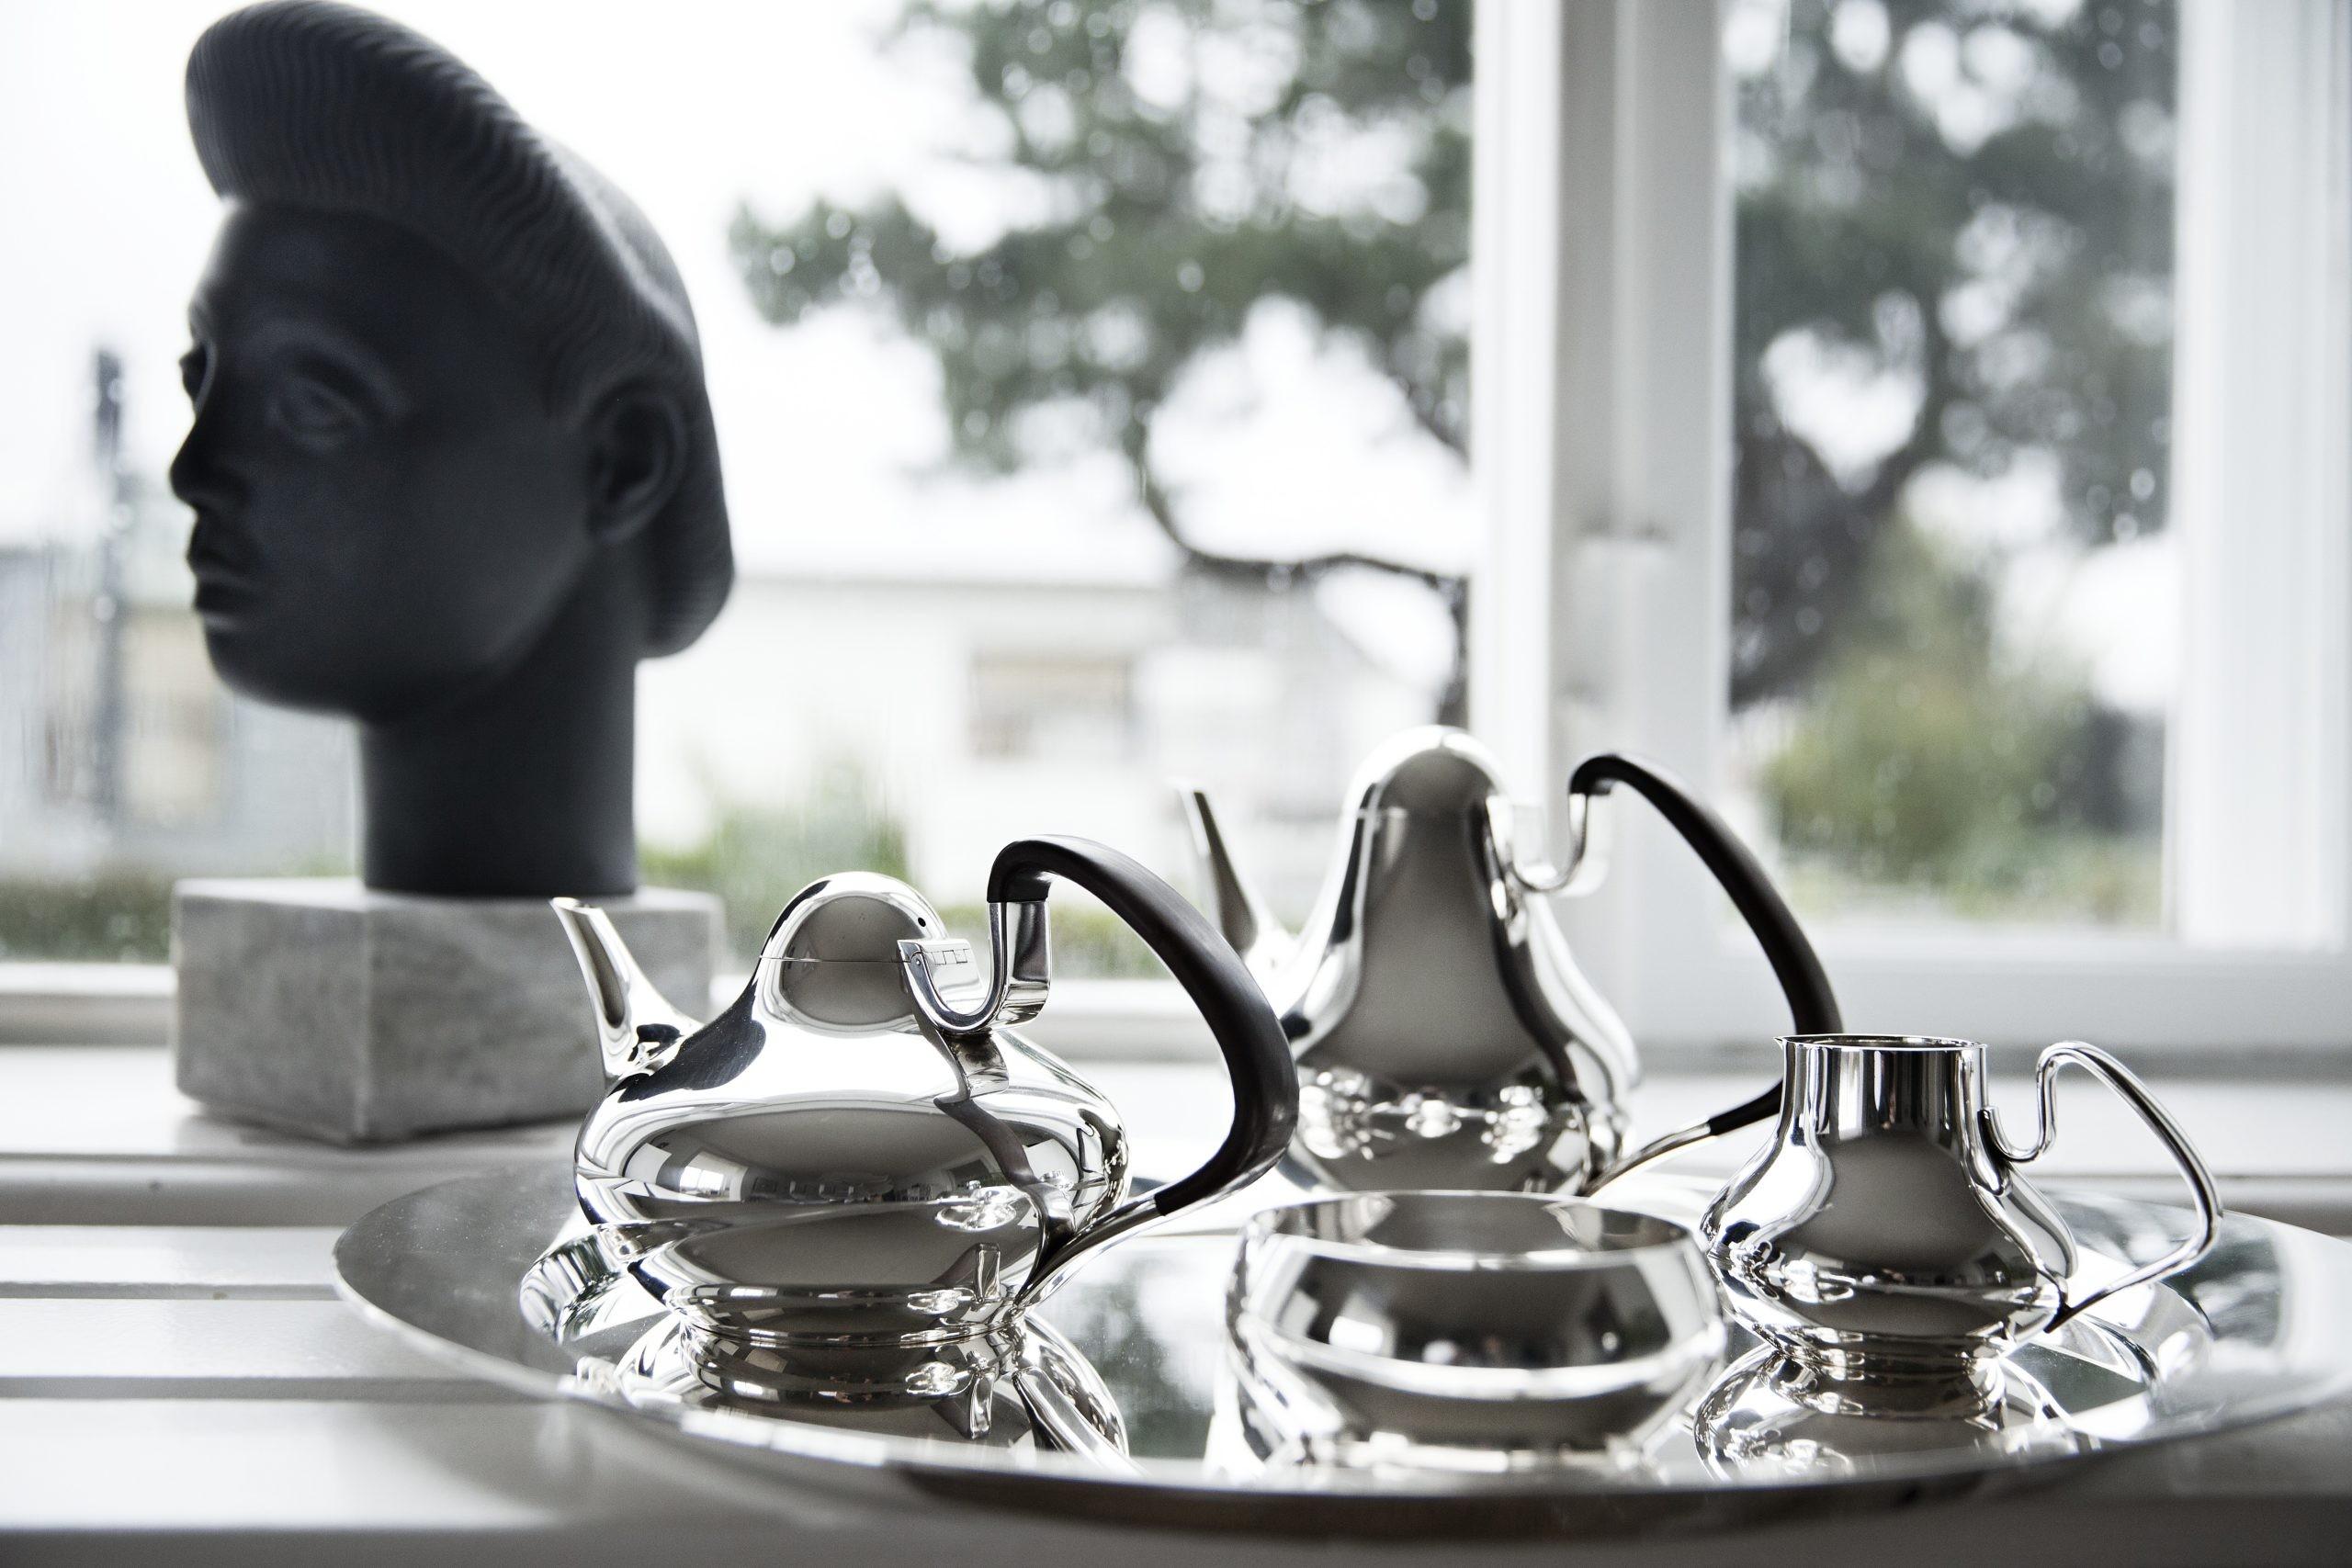 A vintage modern sterling silver Georg Jensen tea and coffee set with tray with handles of guaiacum (a South American hardwood), design #1017 by Henning Koppel from circa 1952. A very sought after design that won a gold medal at the Milan Triennial